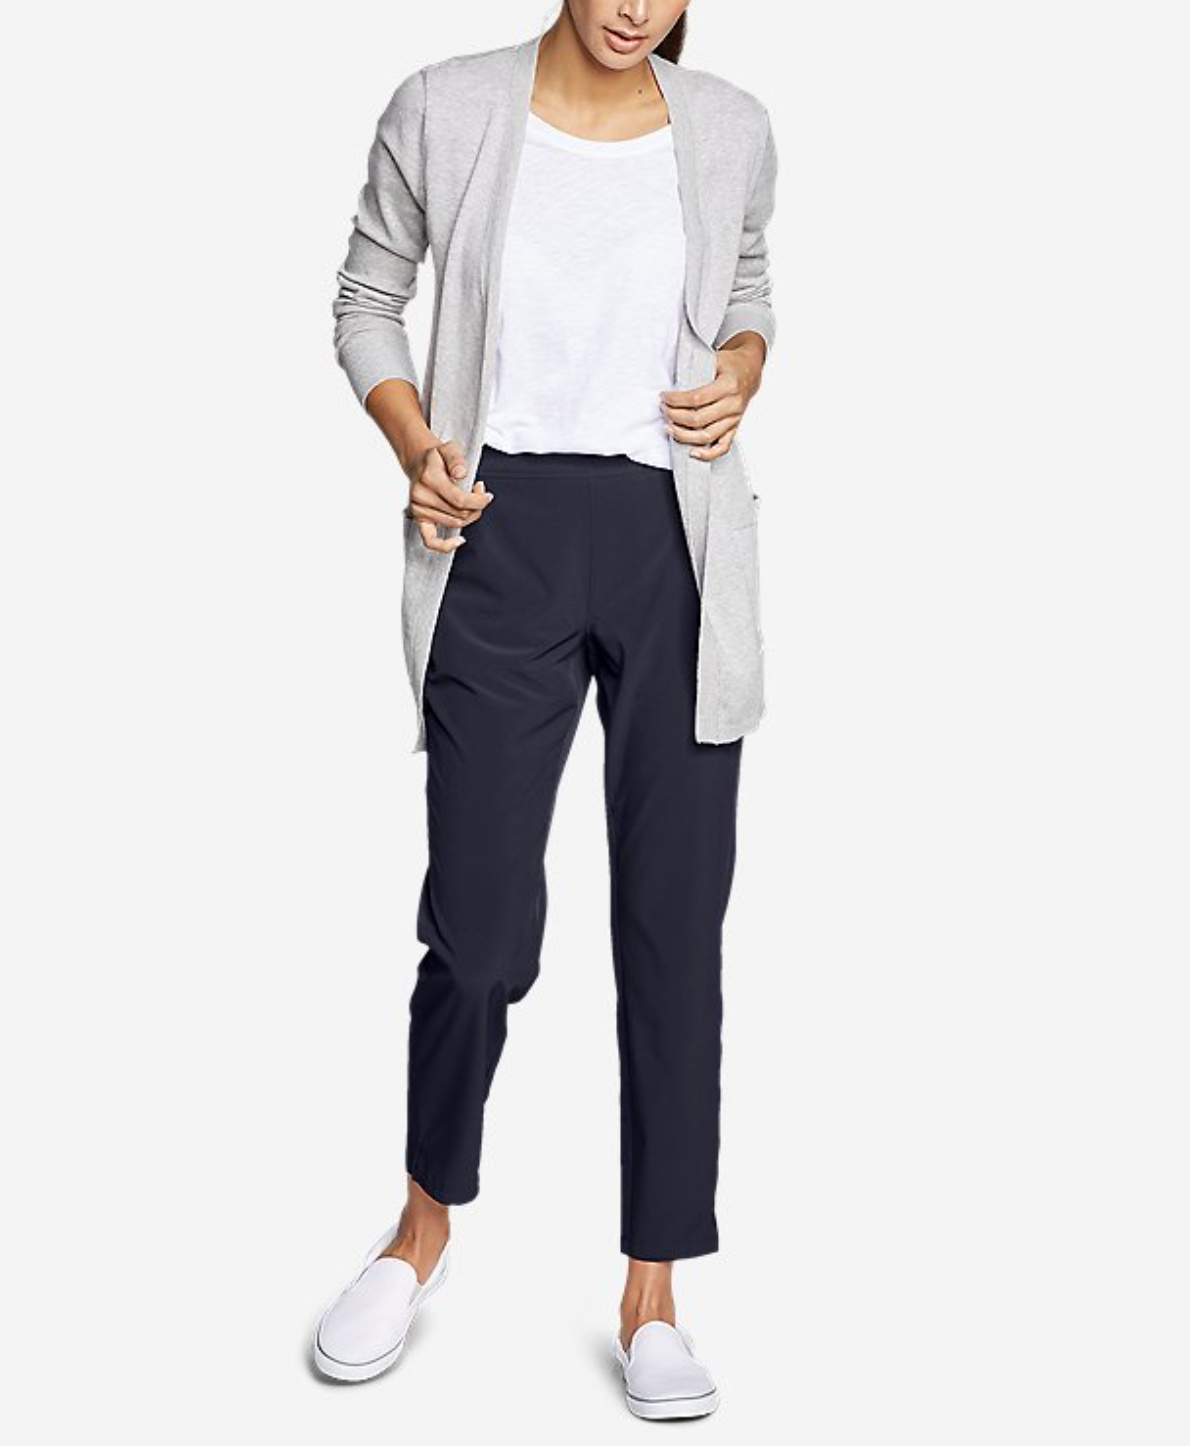 10 Best Travel Pants For Long Flights Reviews In 2023